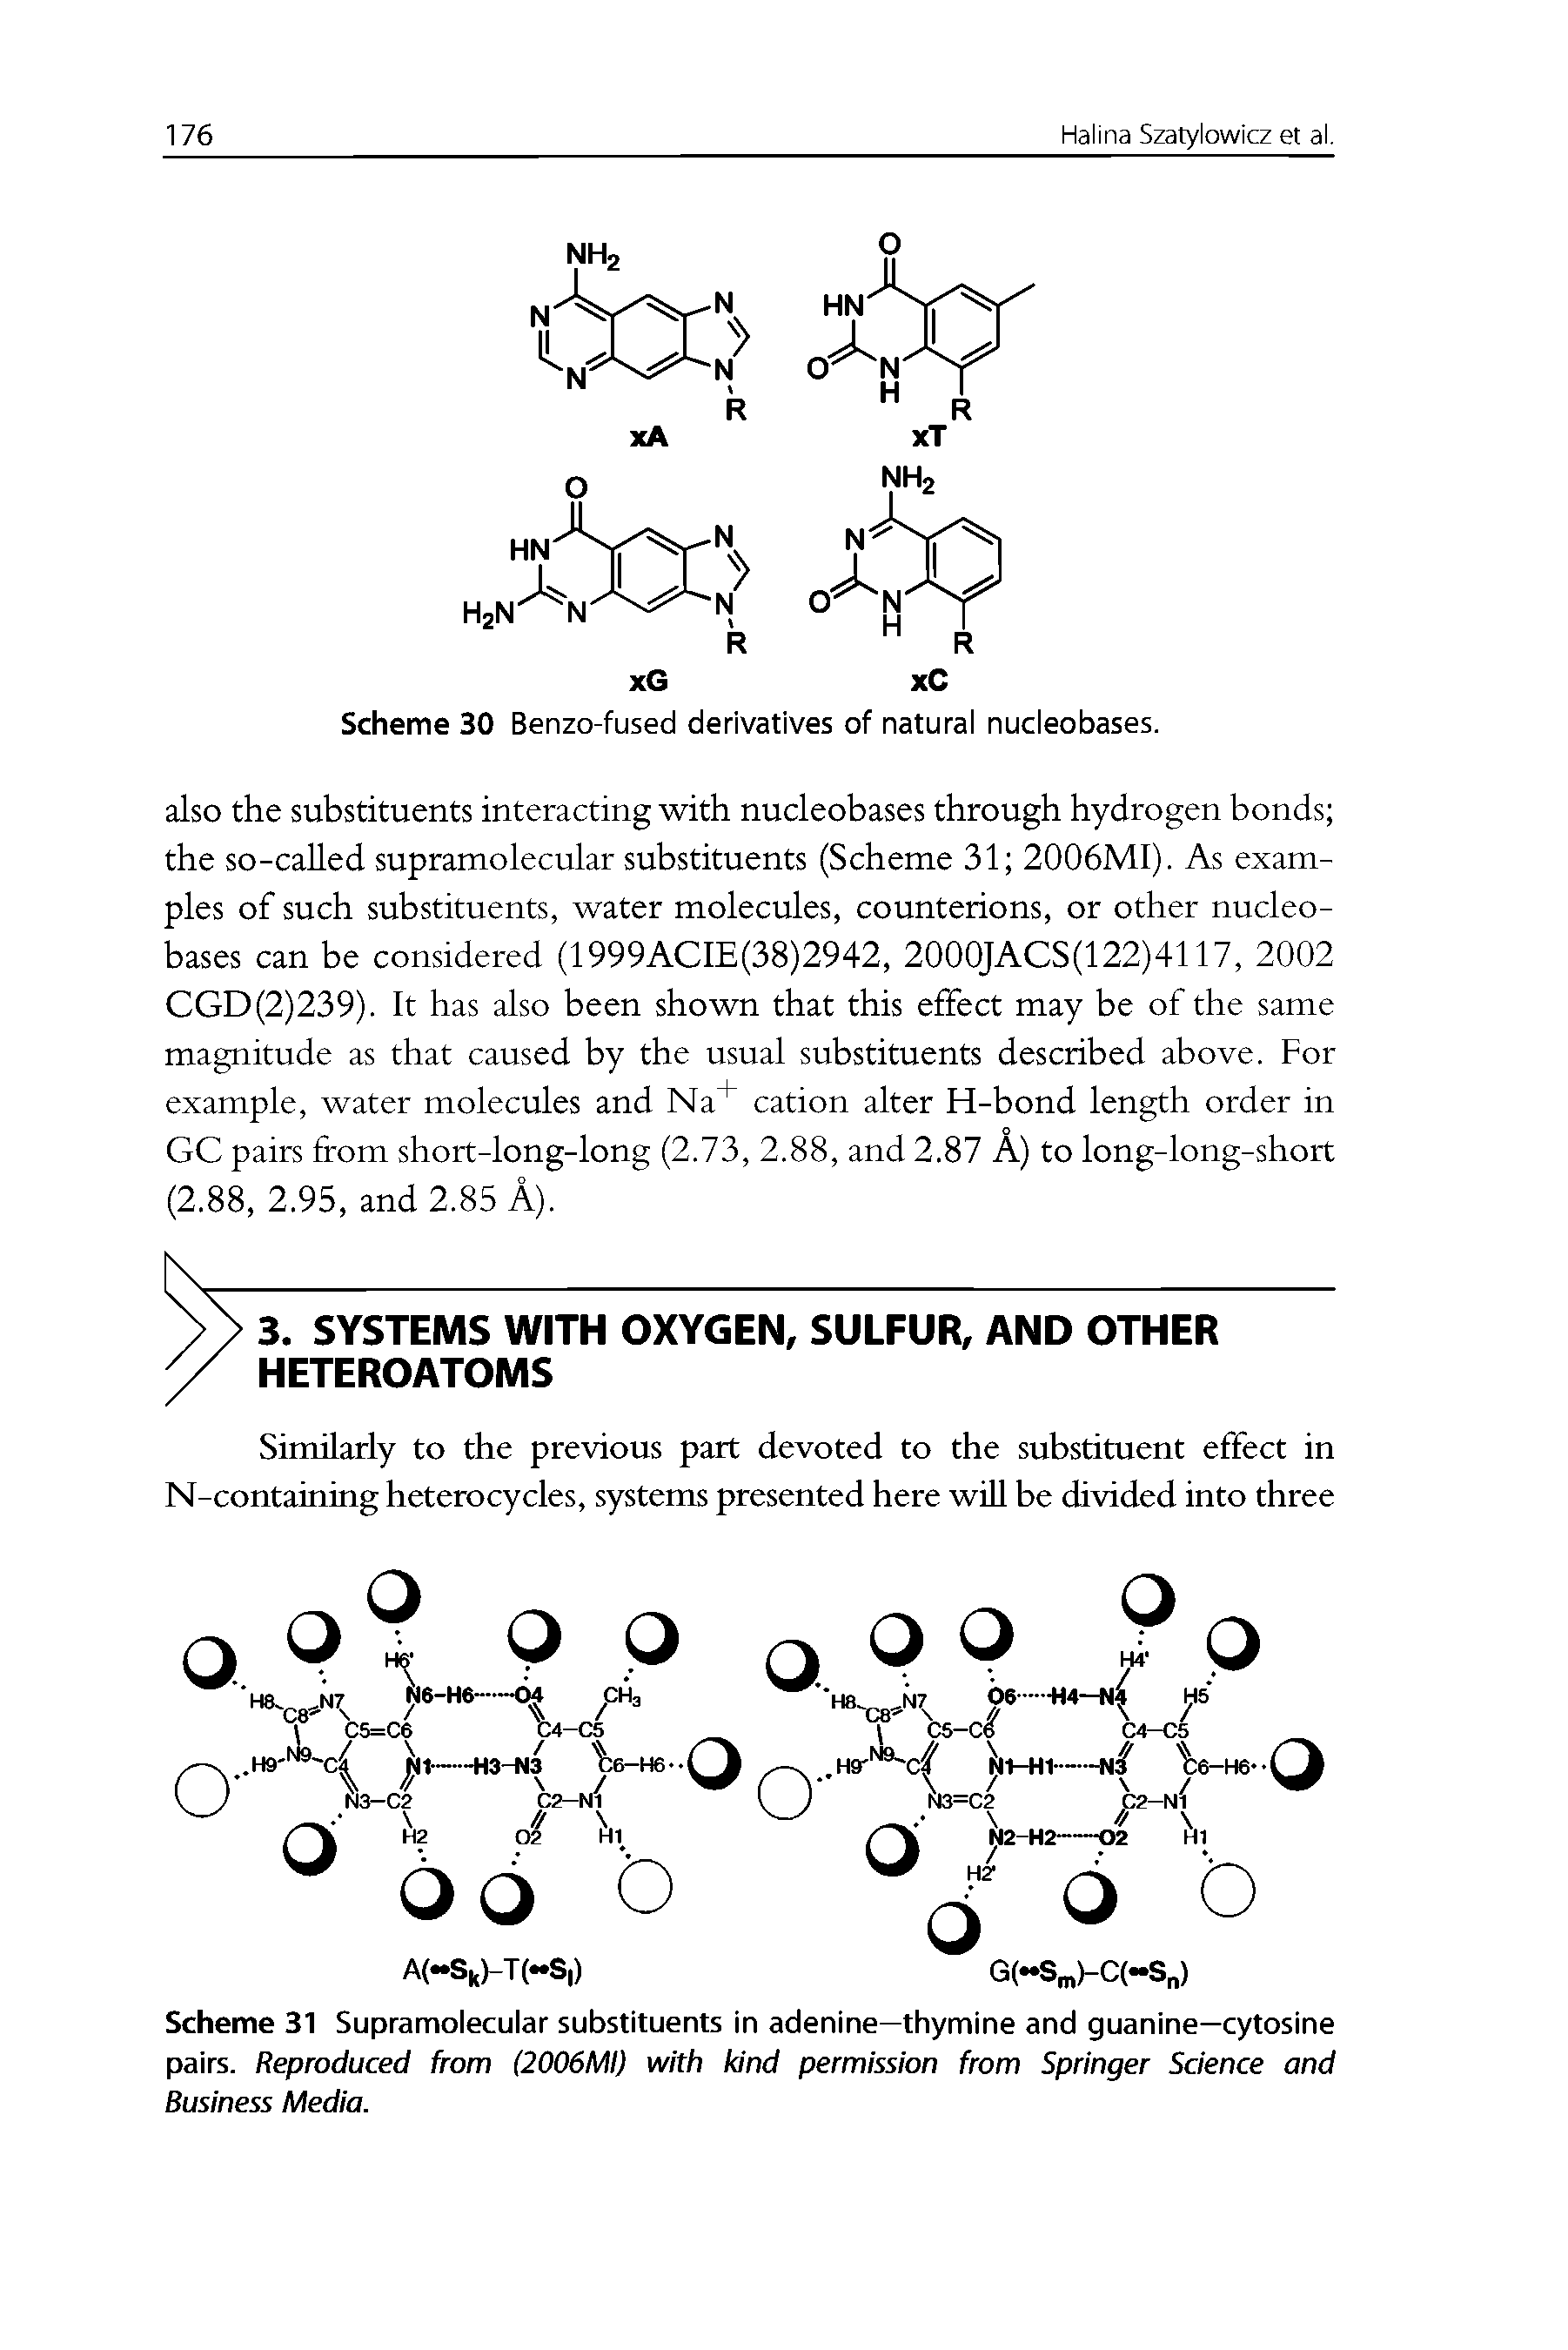 Scheme 31 Supramolecular substituents In adenine—thymine and guanine—cytosine pairs. Reproduced from (2006MI) with kind permission from Springer Science and Business Media.